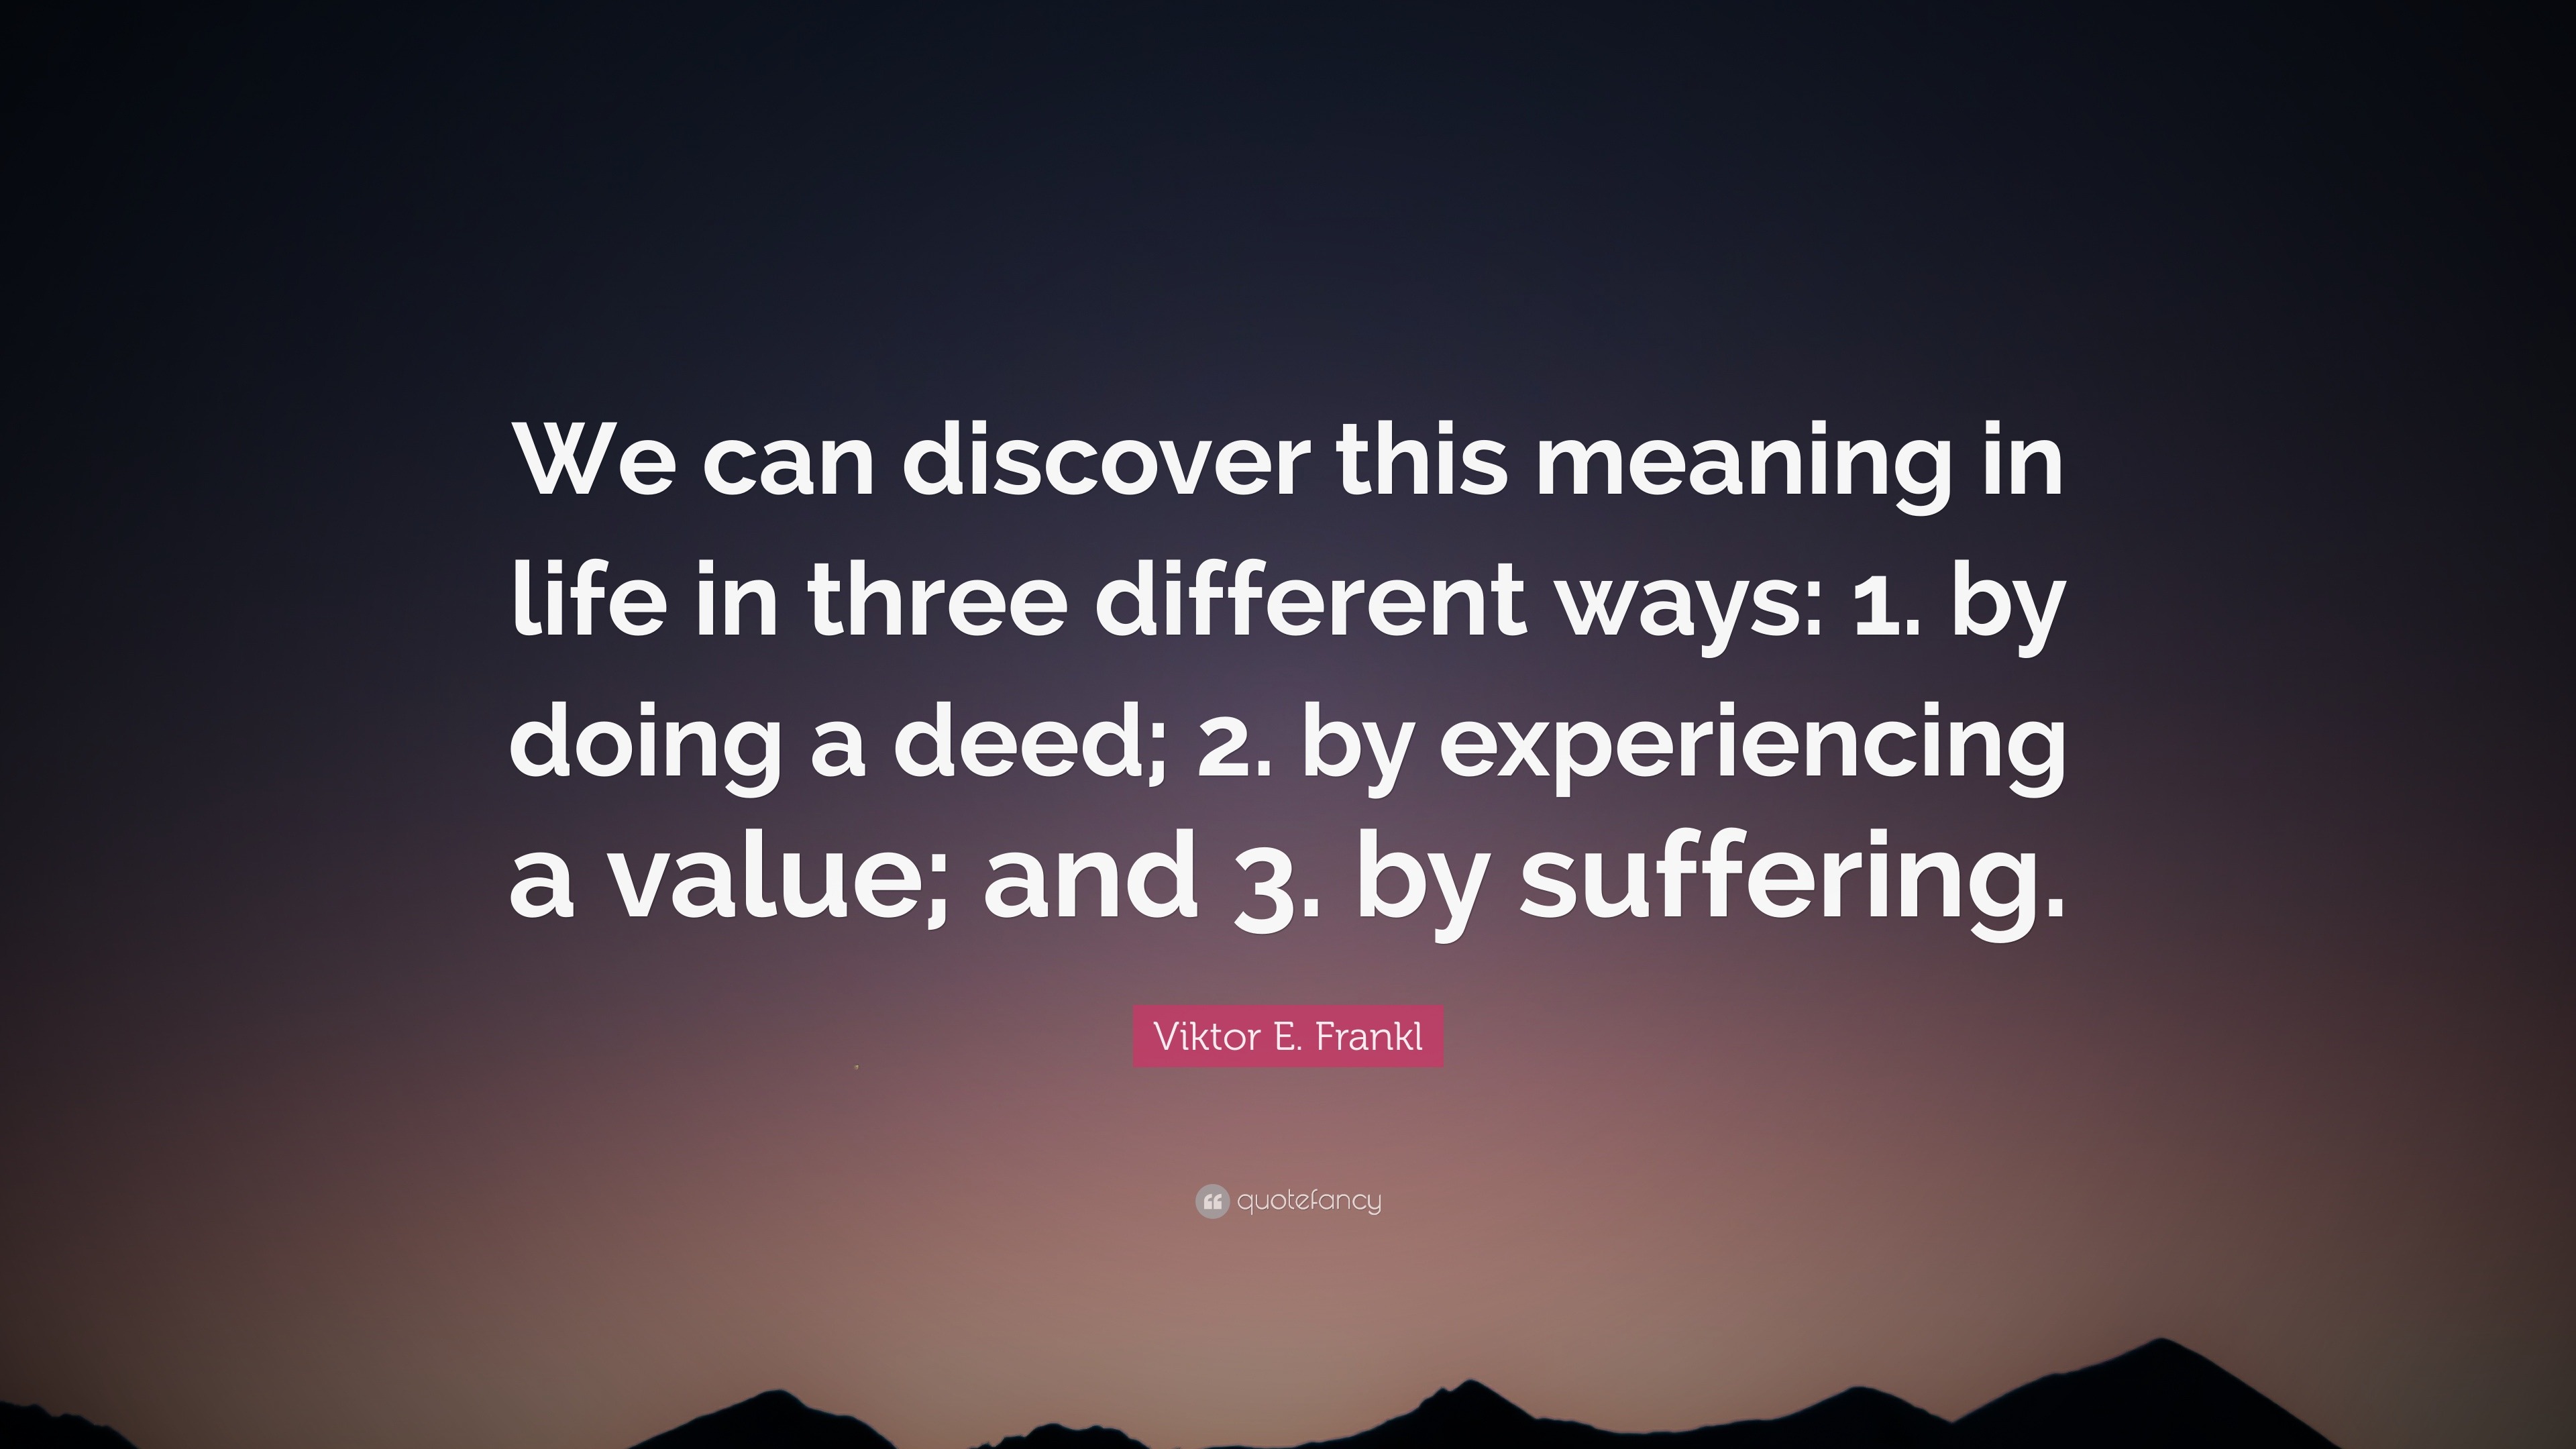 Viktor E Frankl Quote “We can discover this meaning in life in three